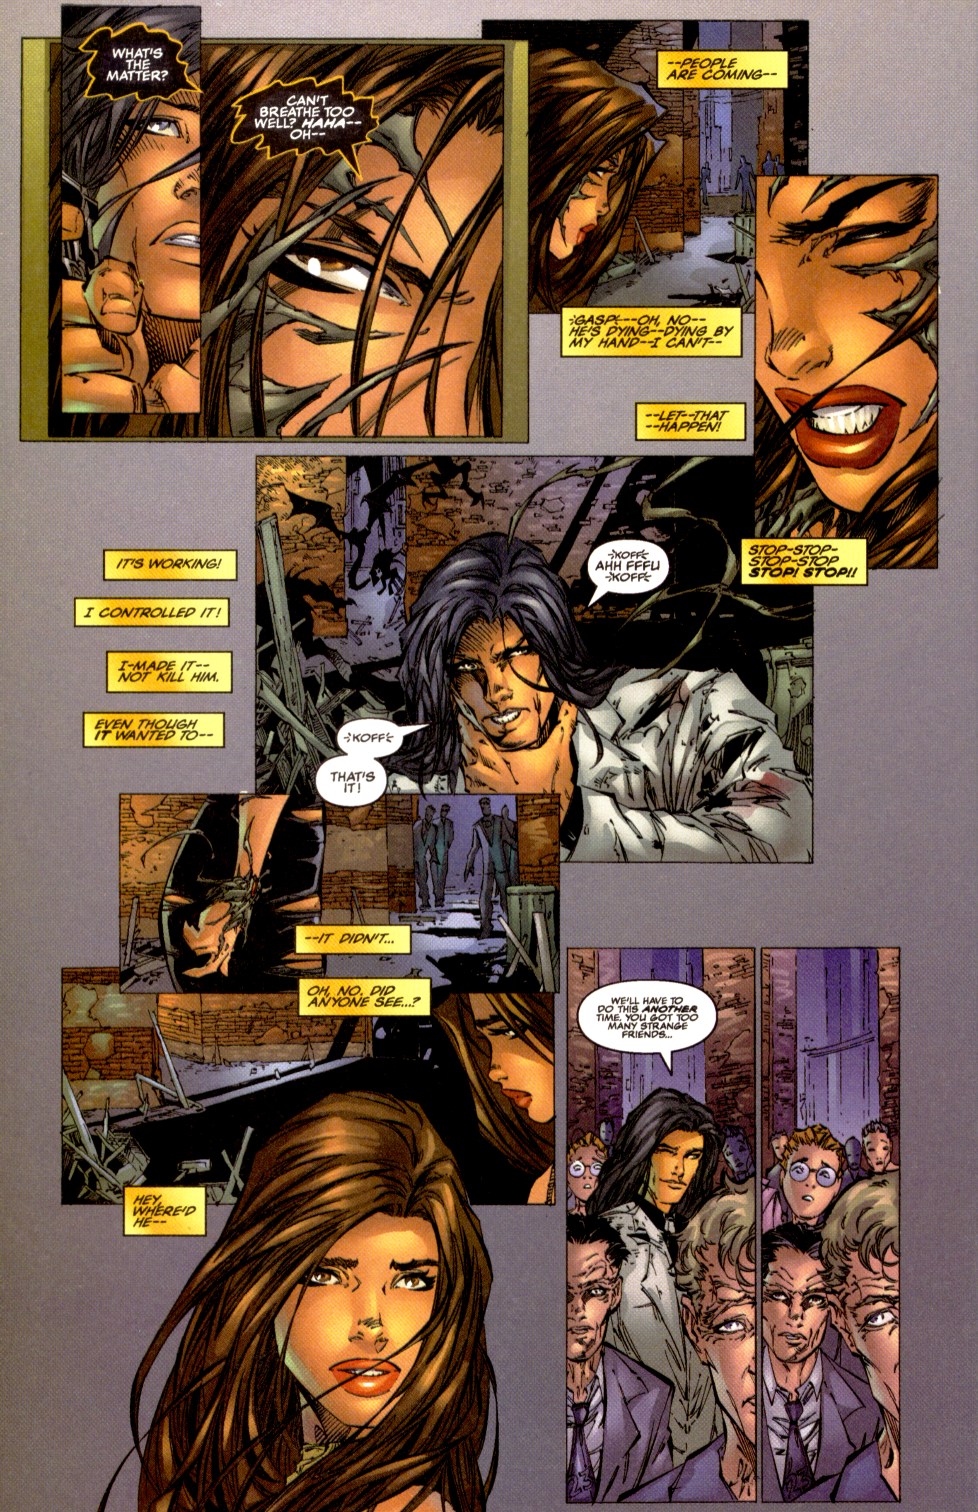 Witchblade #10 - Witchblade & The Darkness